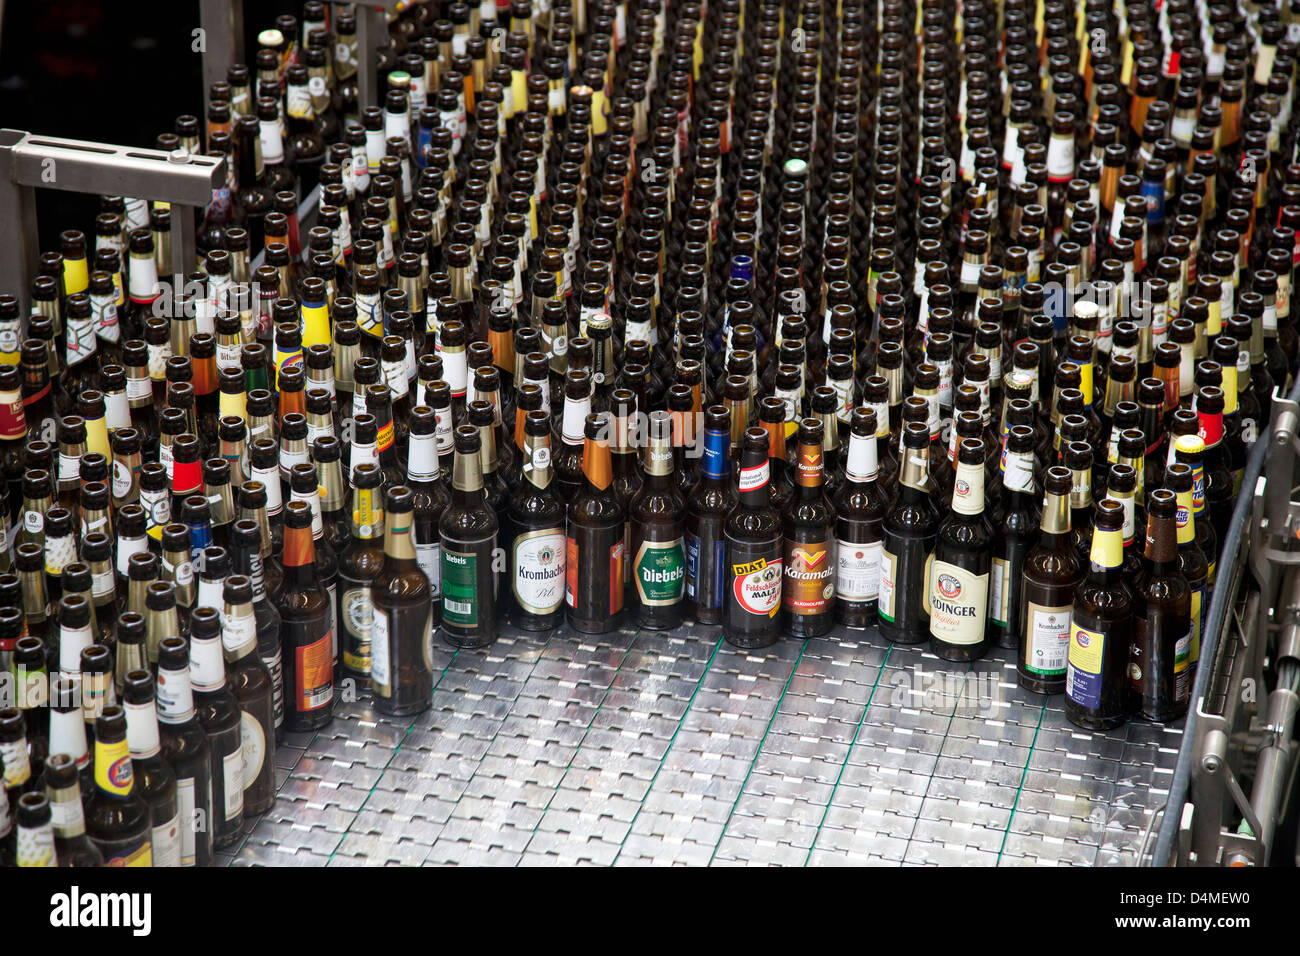 Meschede, Germany, Veltins brewery, empties sorting Stock Photo